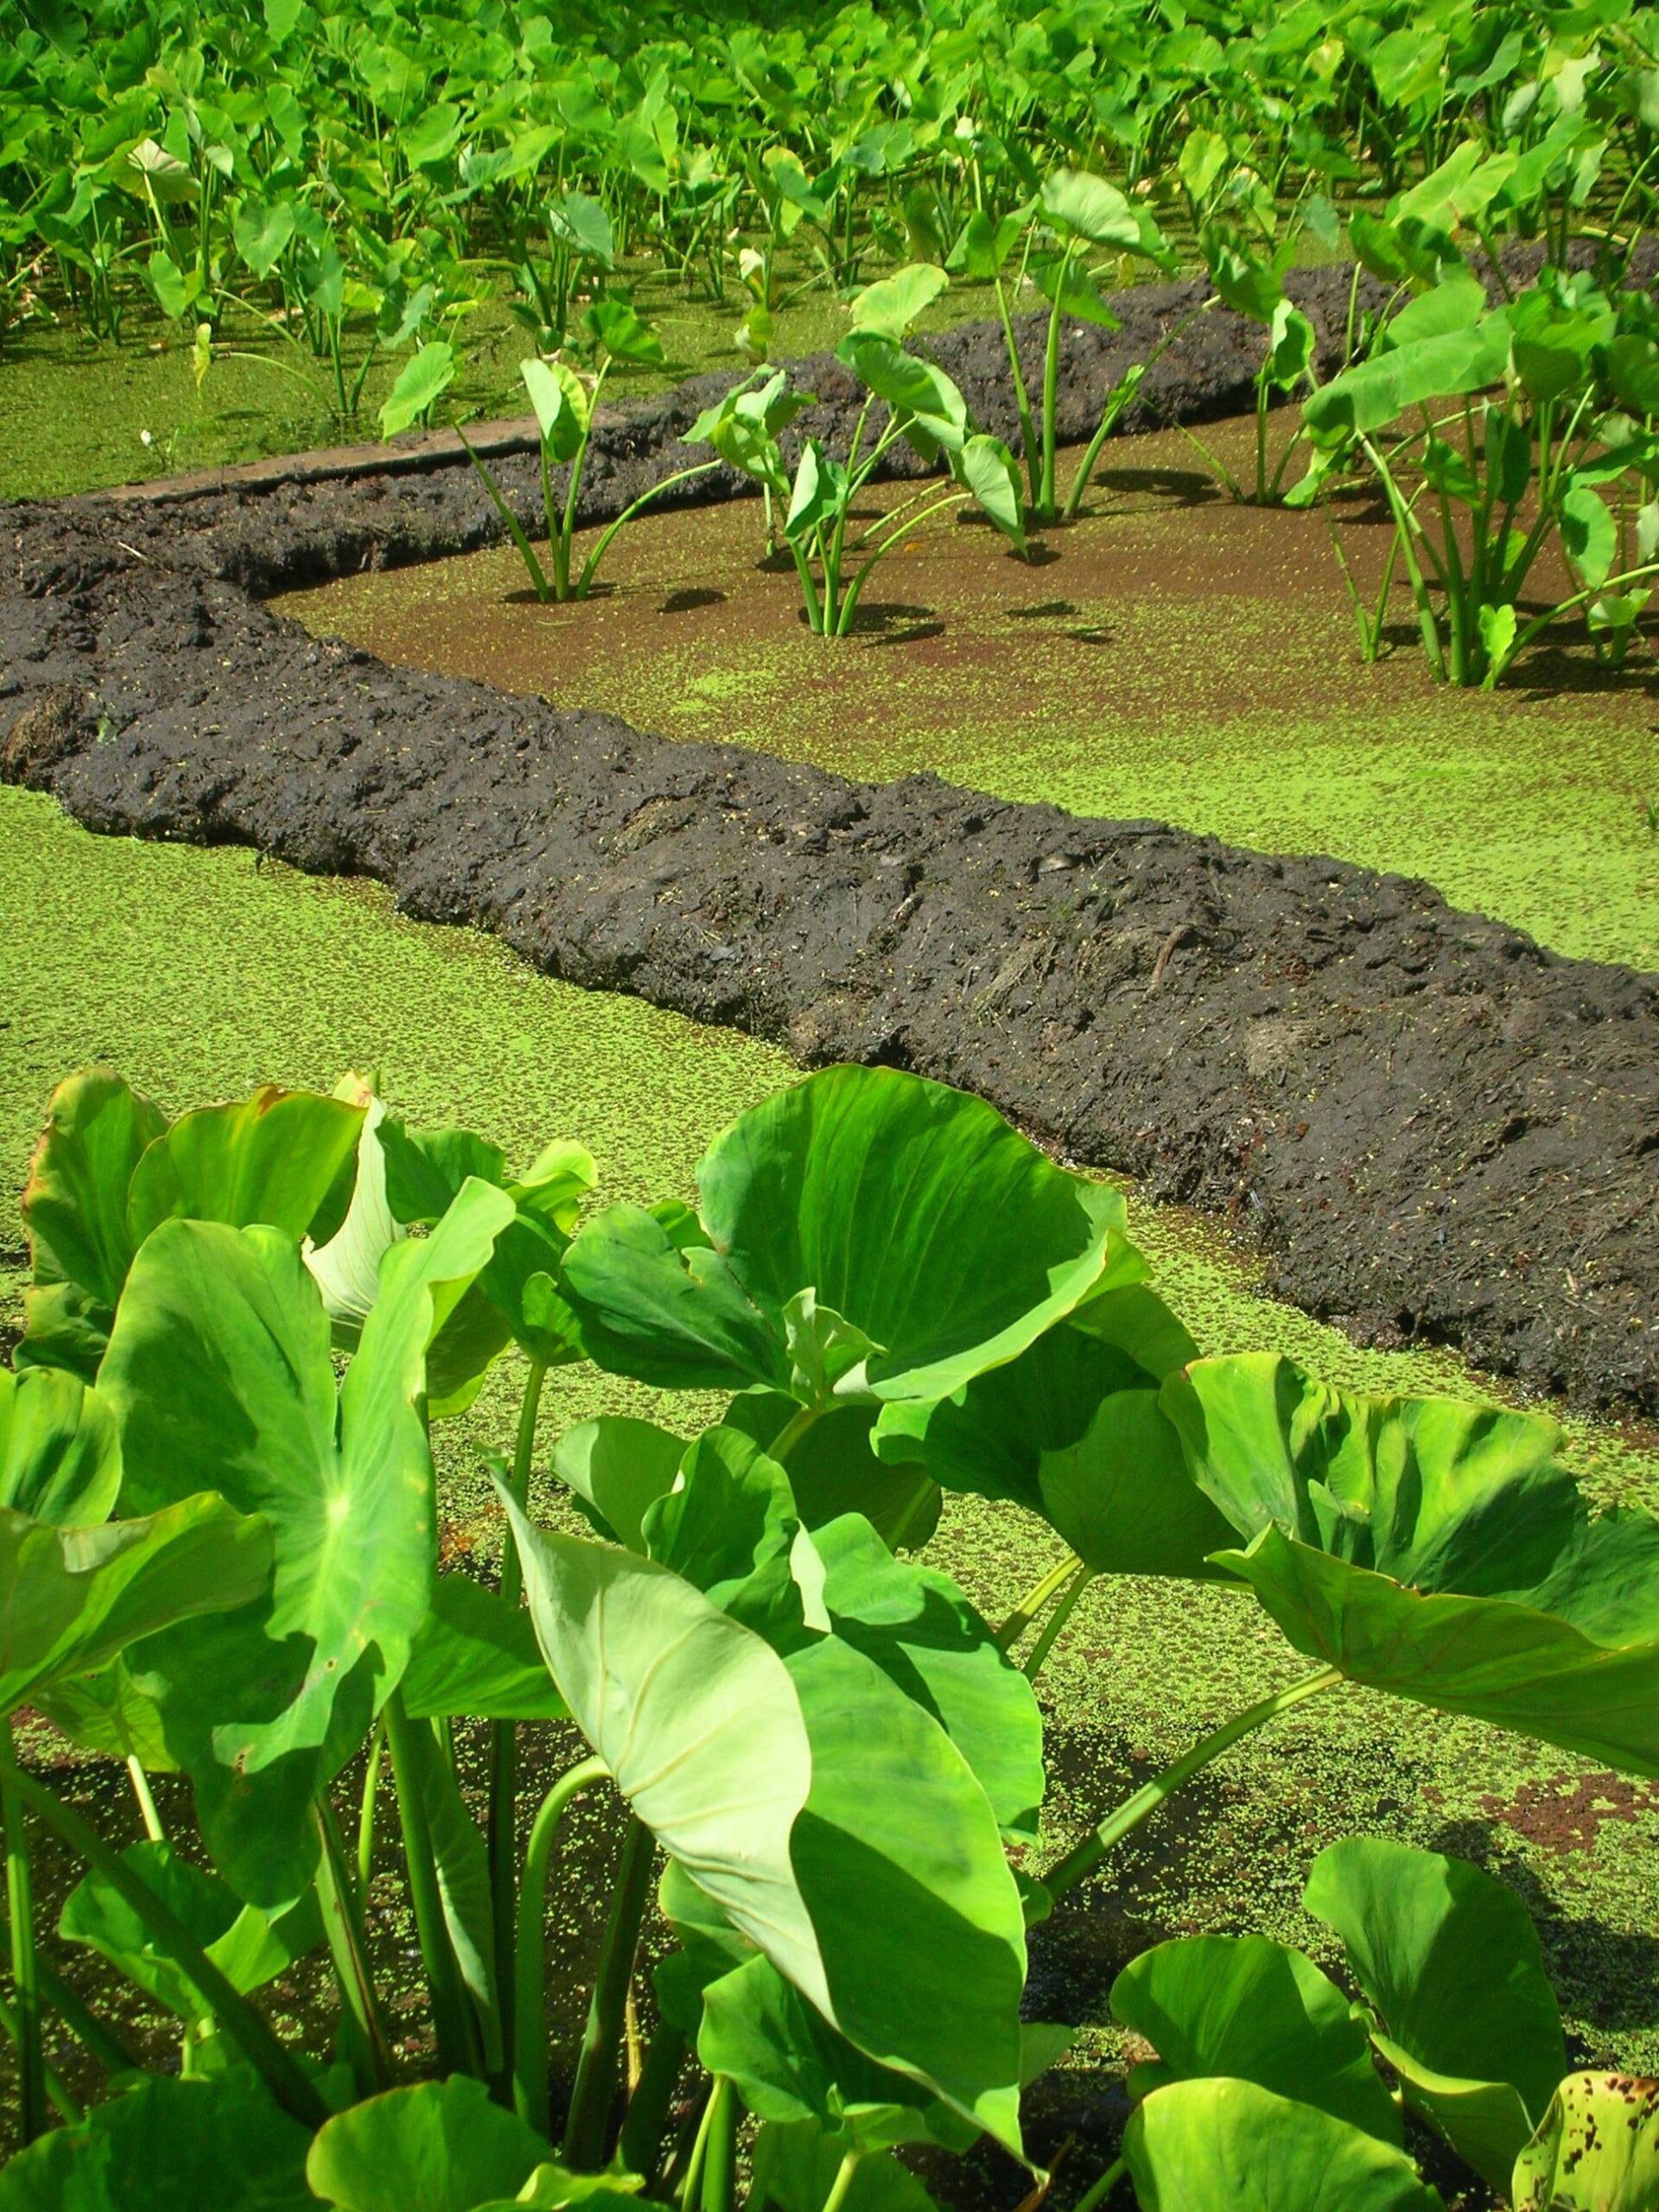 Garden of plants with a mud path